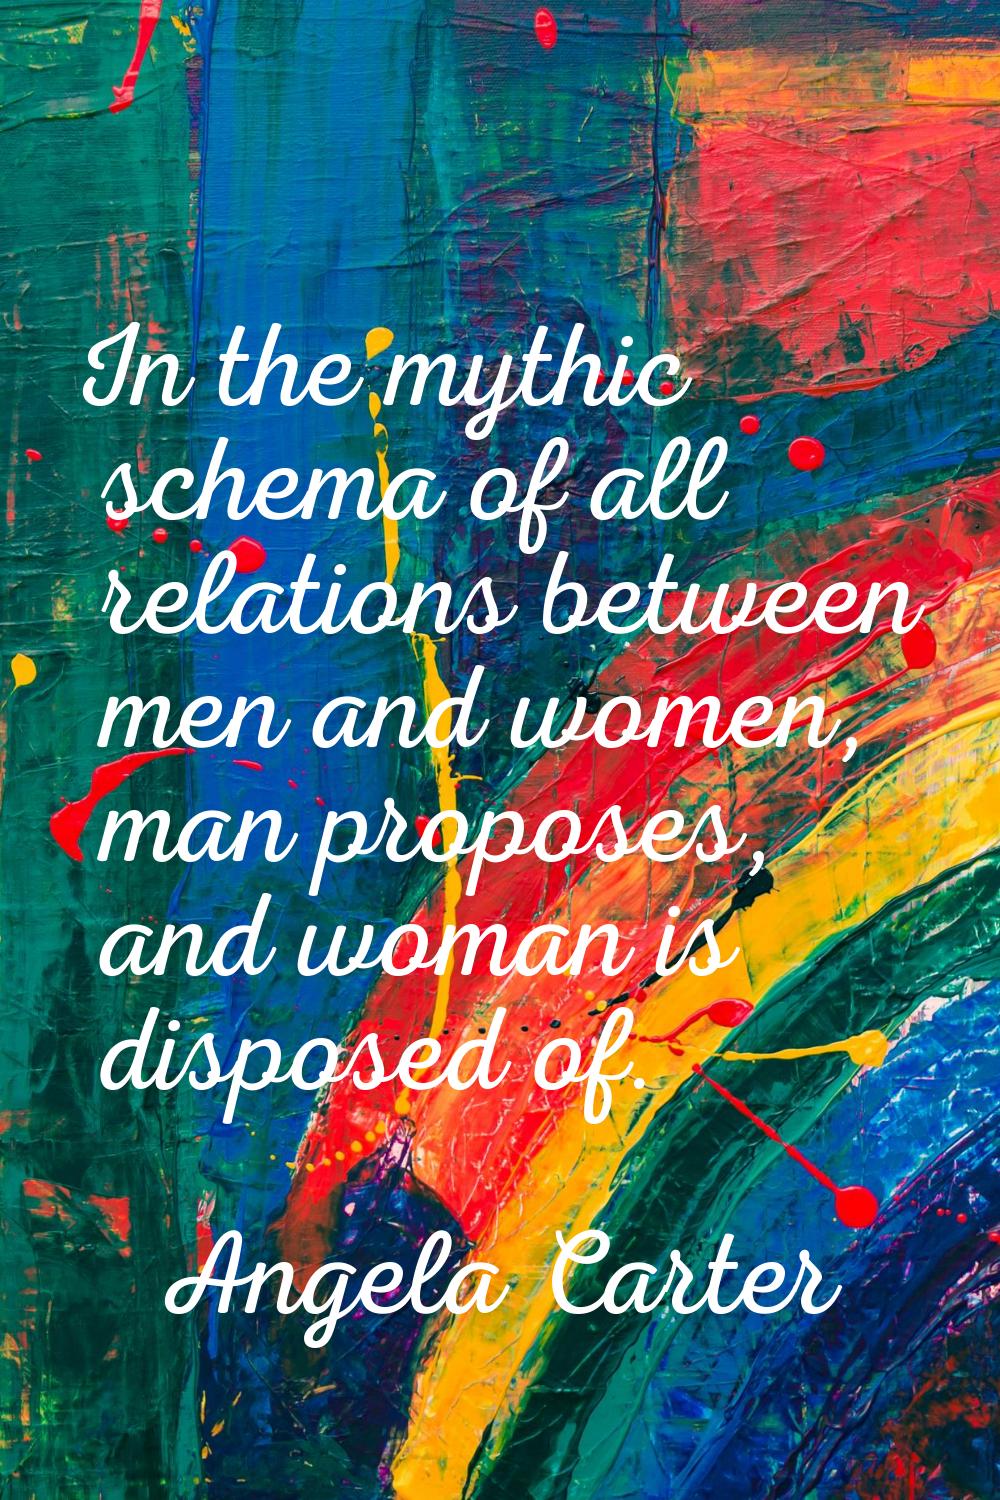 In the mythic schema of all relations between men and women, man proposes, and woman is disposed of